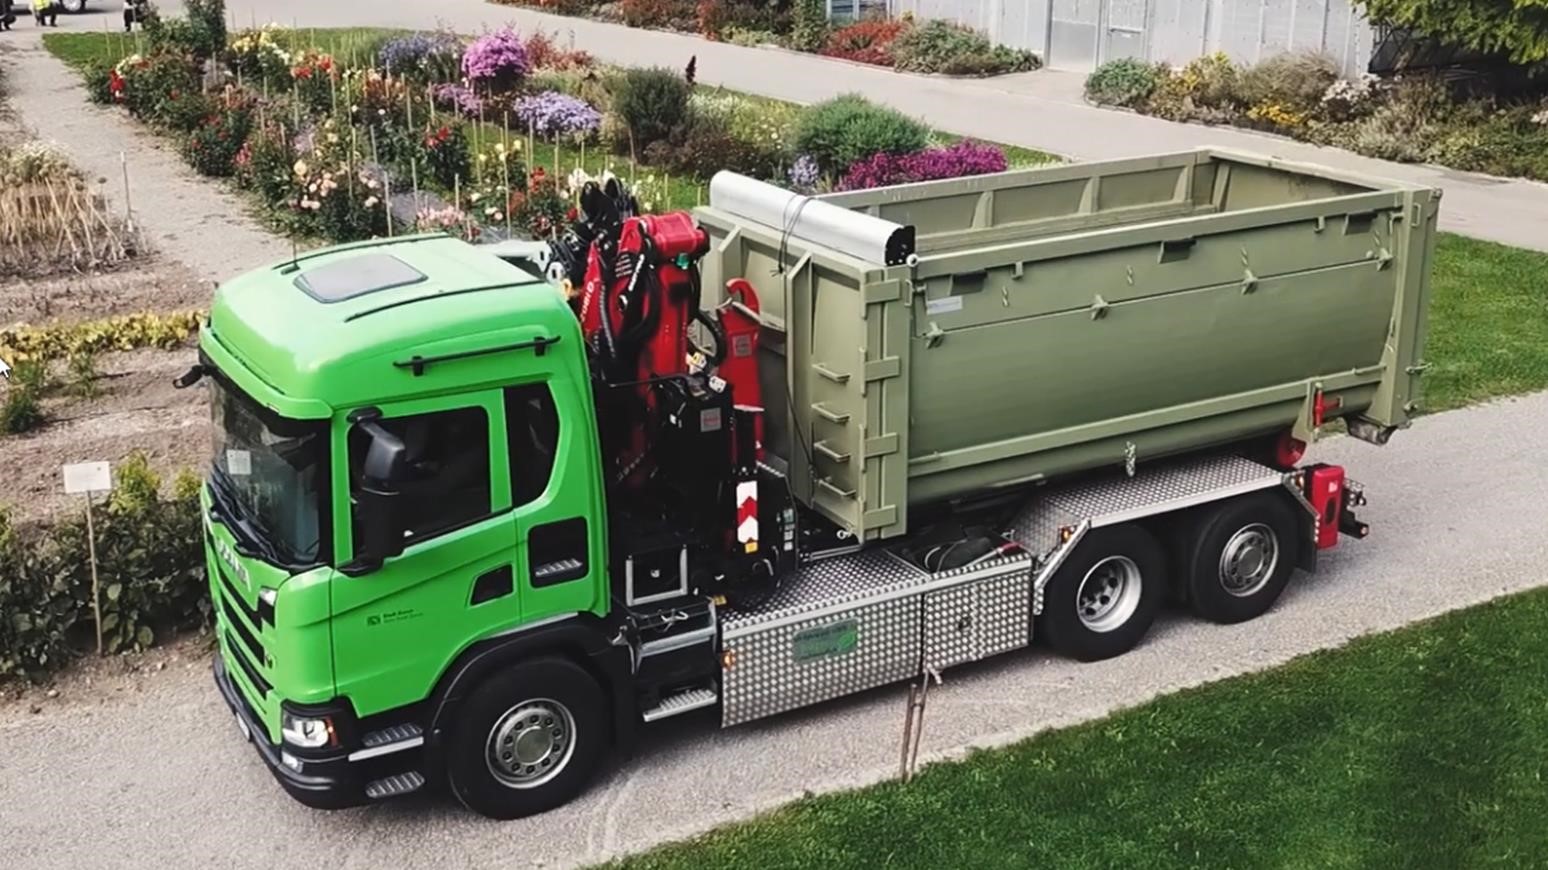 Zürich Office Of Parks & Open Spaces Uses Green Waste To Fuel Scania G 410 Biogas Truck